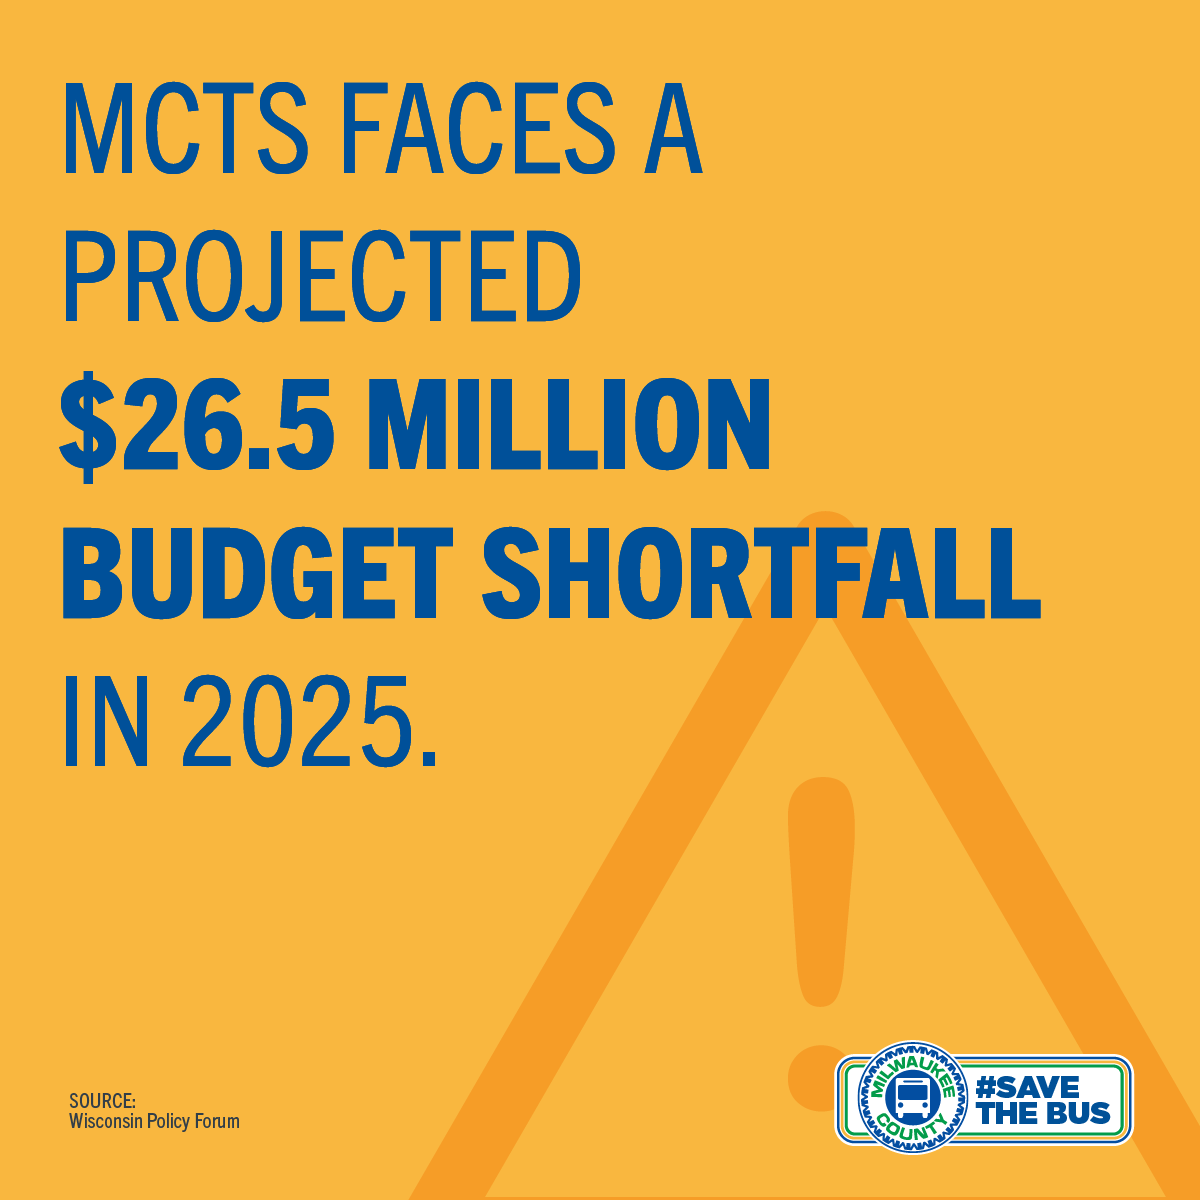 MCTS faces a projected $26.5 million budget shortfall in 2025.